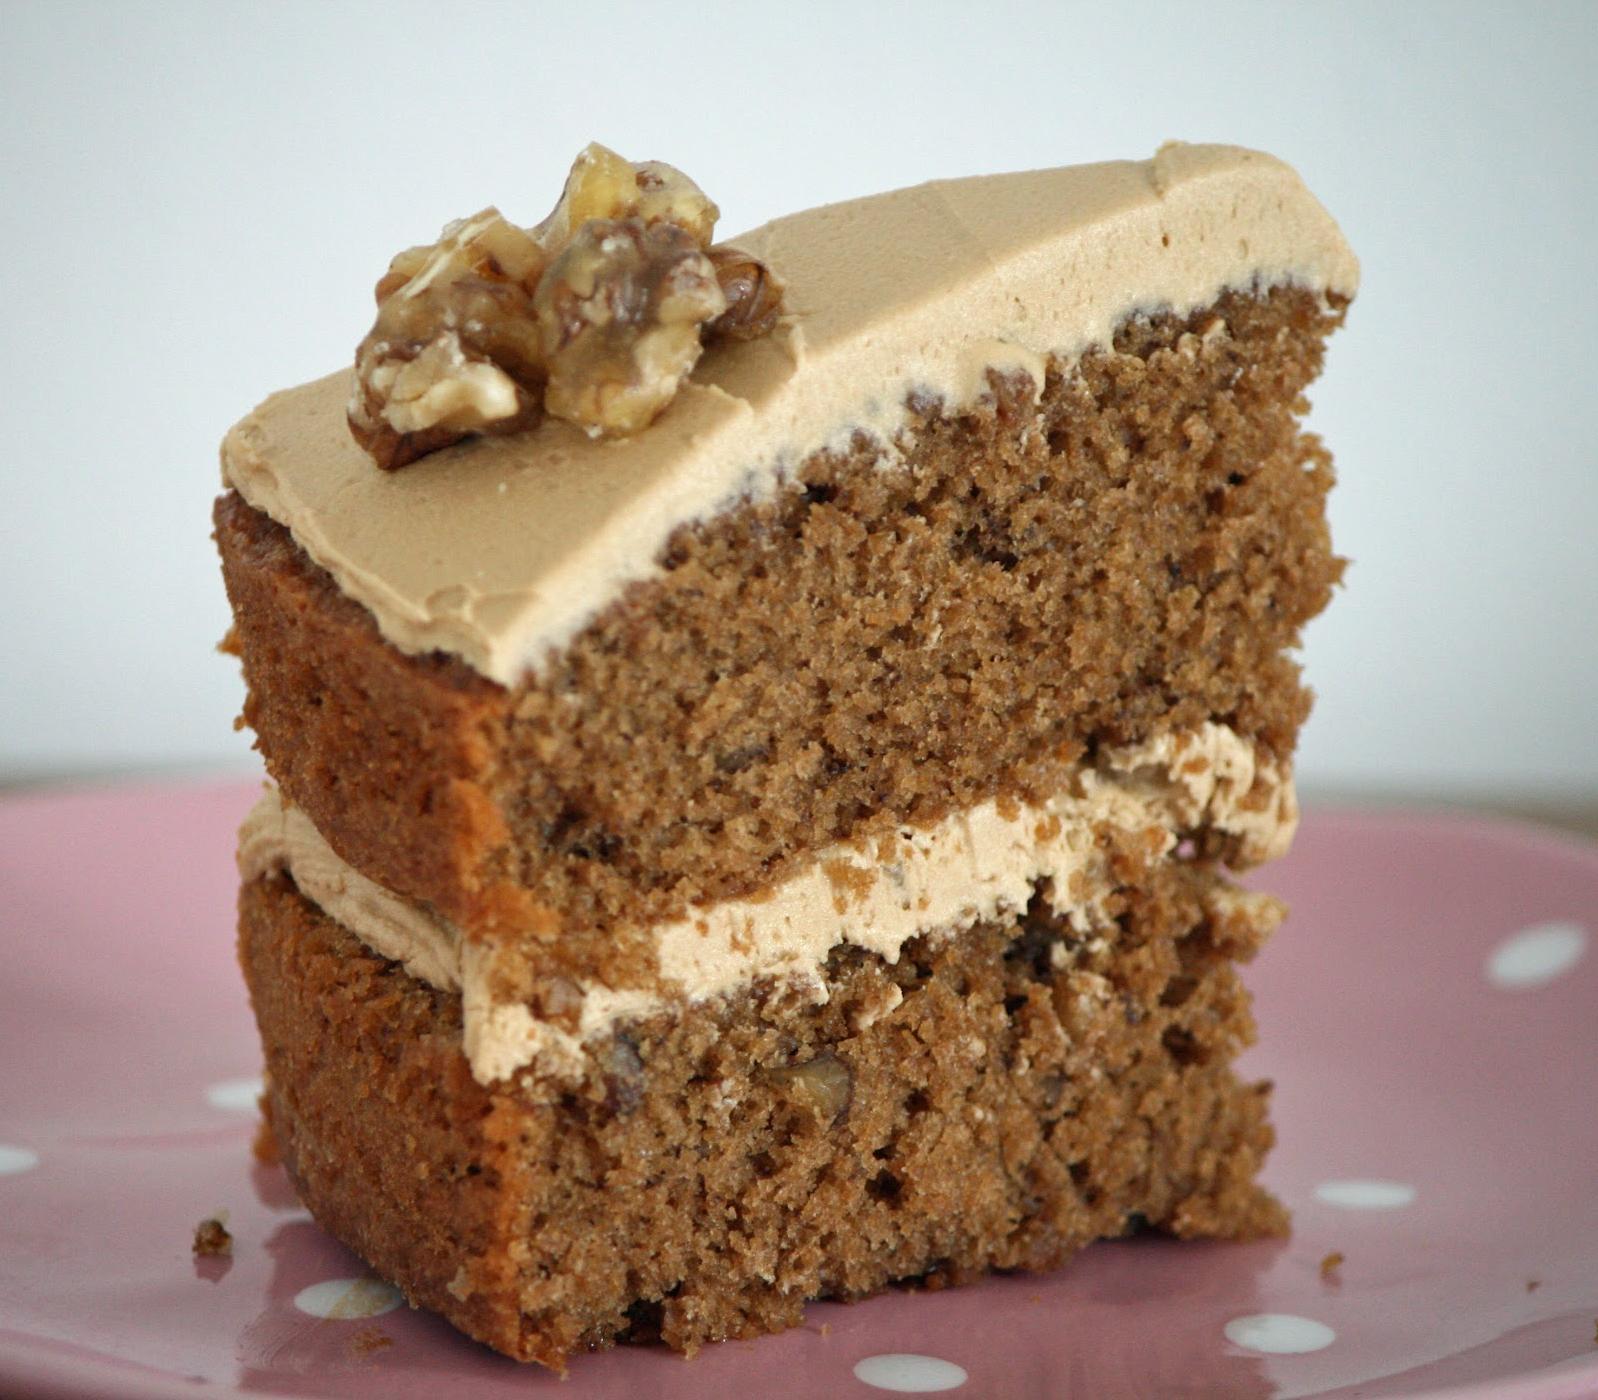  Add some crunch to your morning brew with a walnut cake.